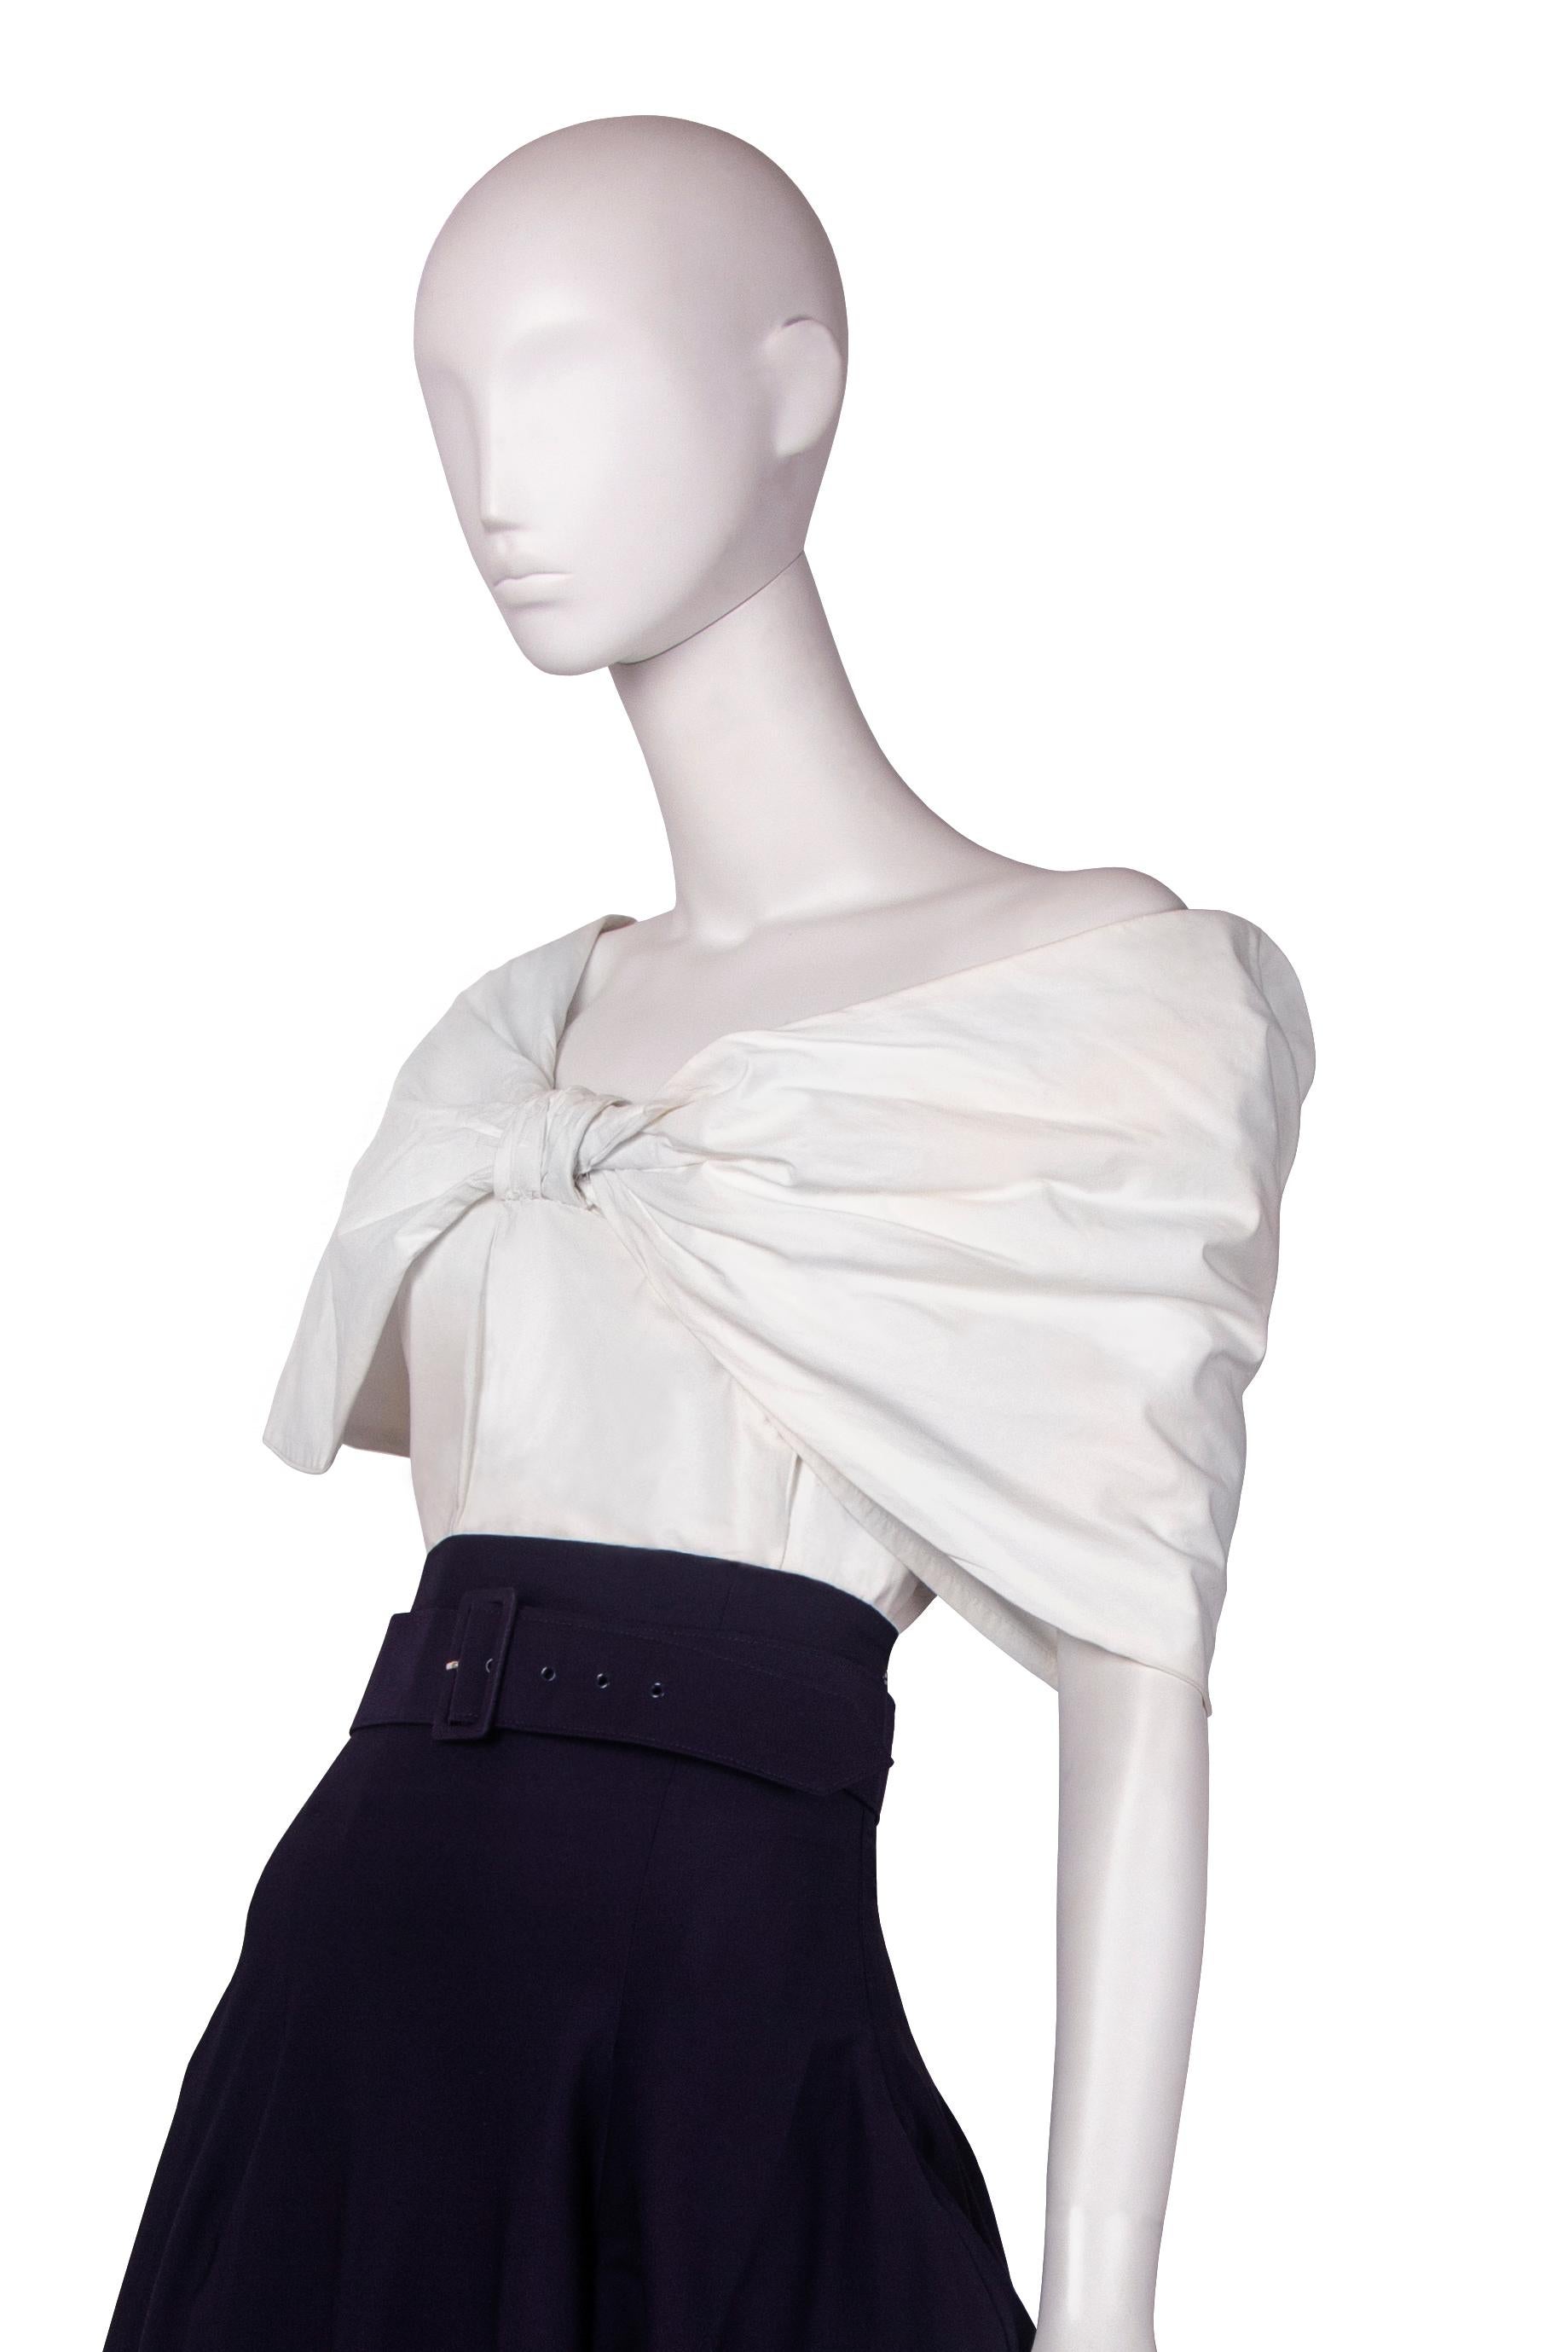 This John Galliano runway ensemble from Spring-Summer 1988 ‘Blanche Dubois’ combines two main themes from the collection: the bow and polonaise skirt. 

The bodice is made of cotton with rigilene boning and features a large frontal bow, the hero